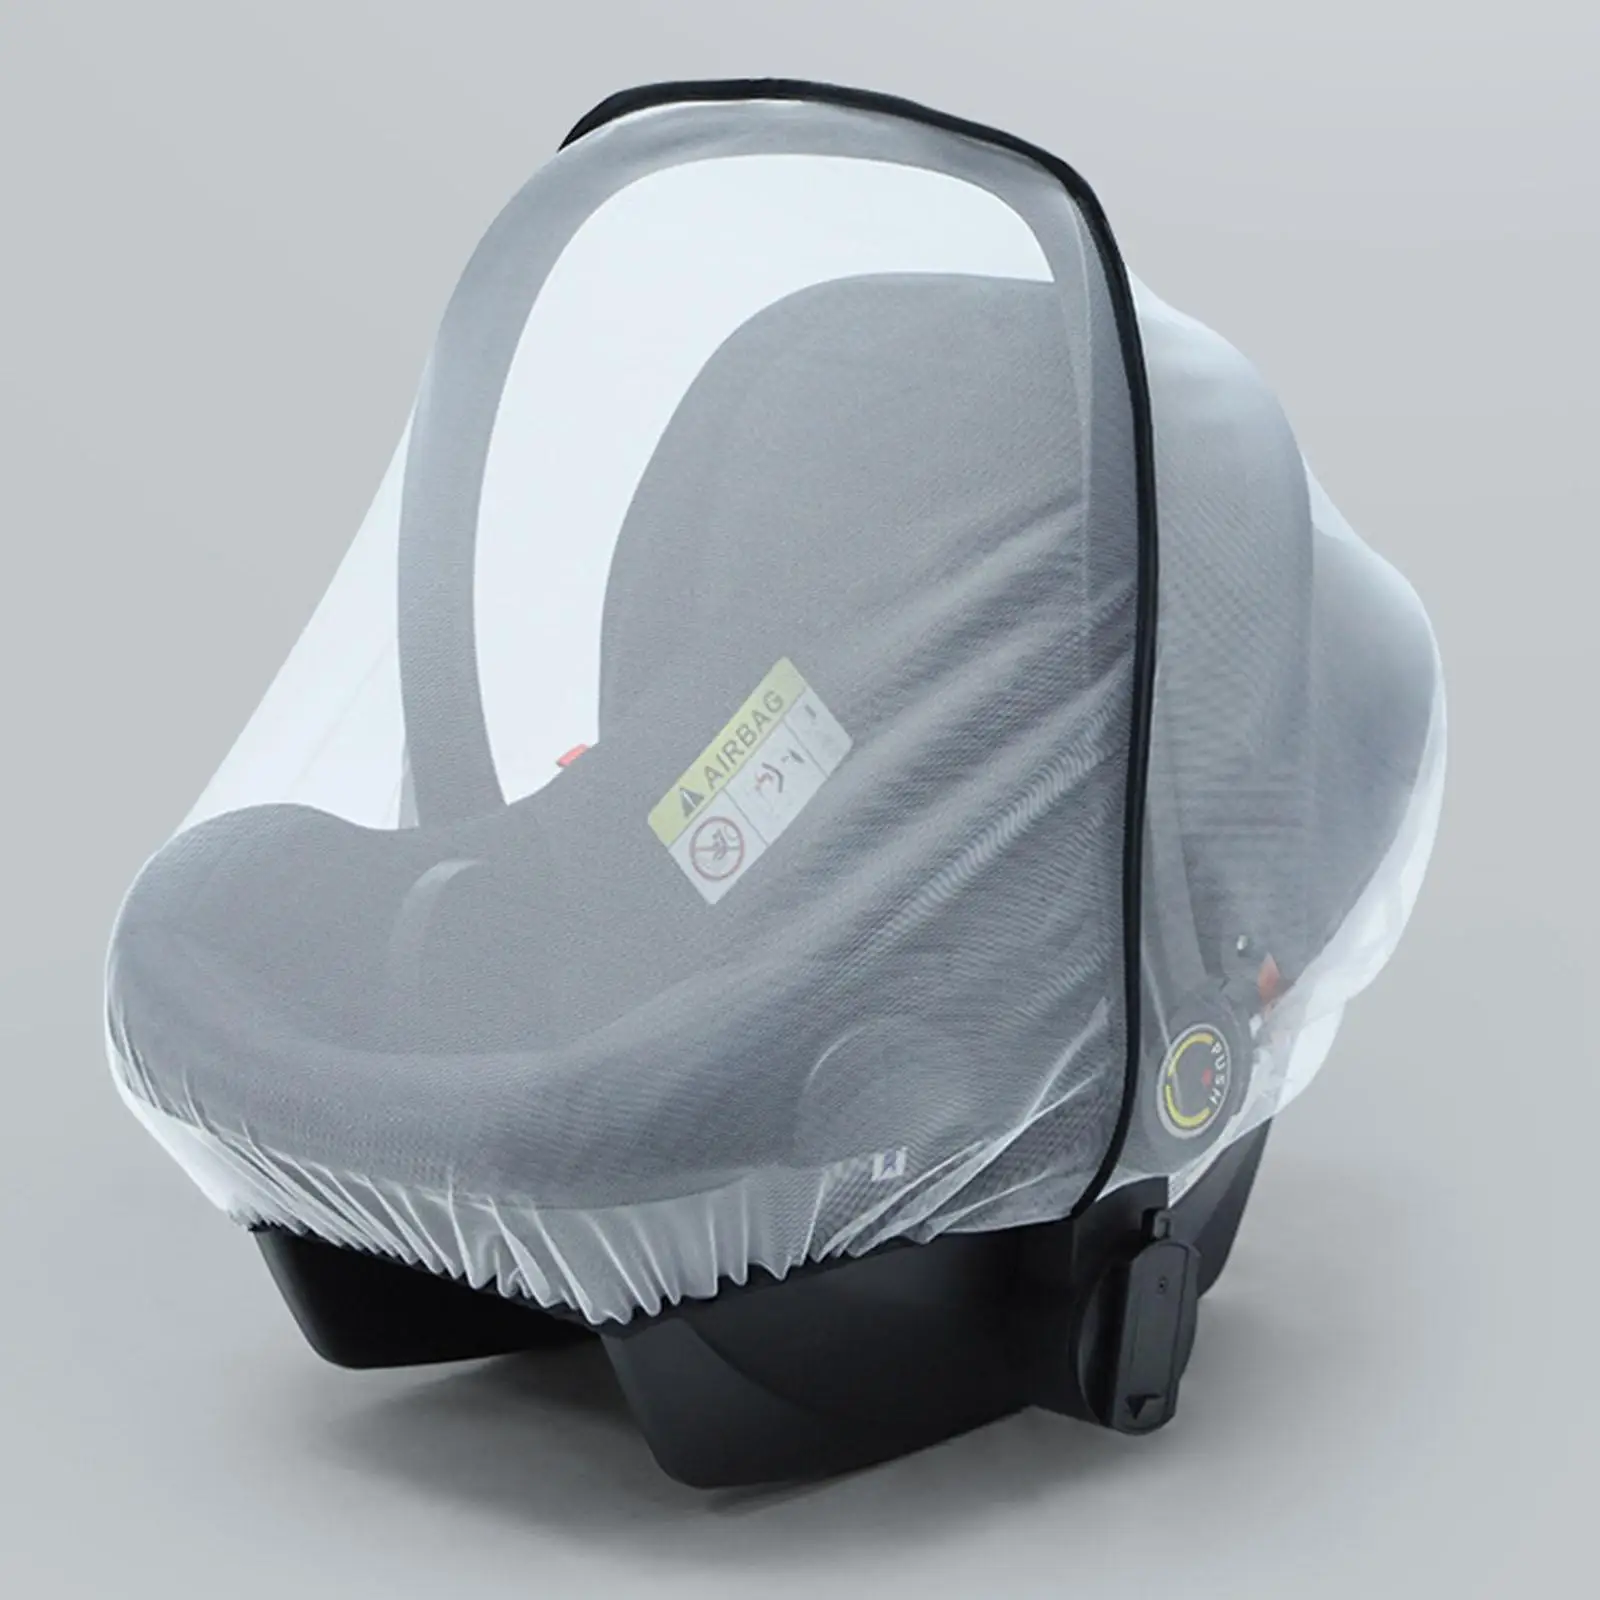 Mesh Stroller Pushchair Carrycot Protection Portable Protector Stretchable Pram Cover for Infant Toddlers Child Kids